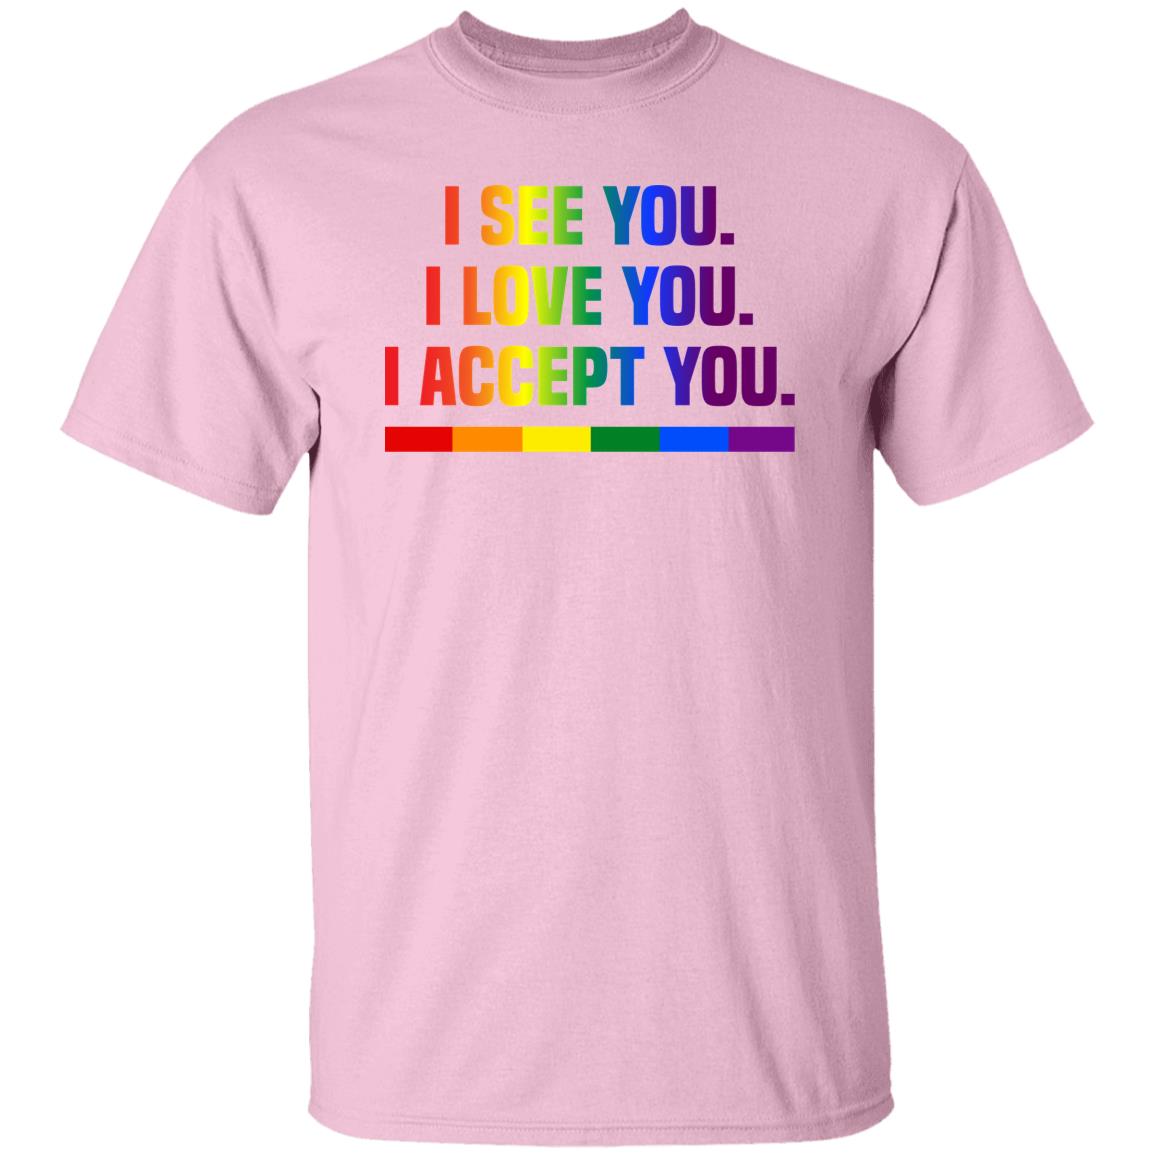 pink Acceptance Advocate Apparel I See, I Love You, I Accept You Shirt